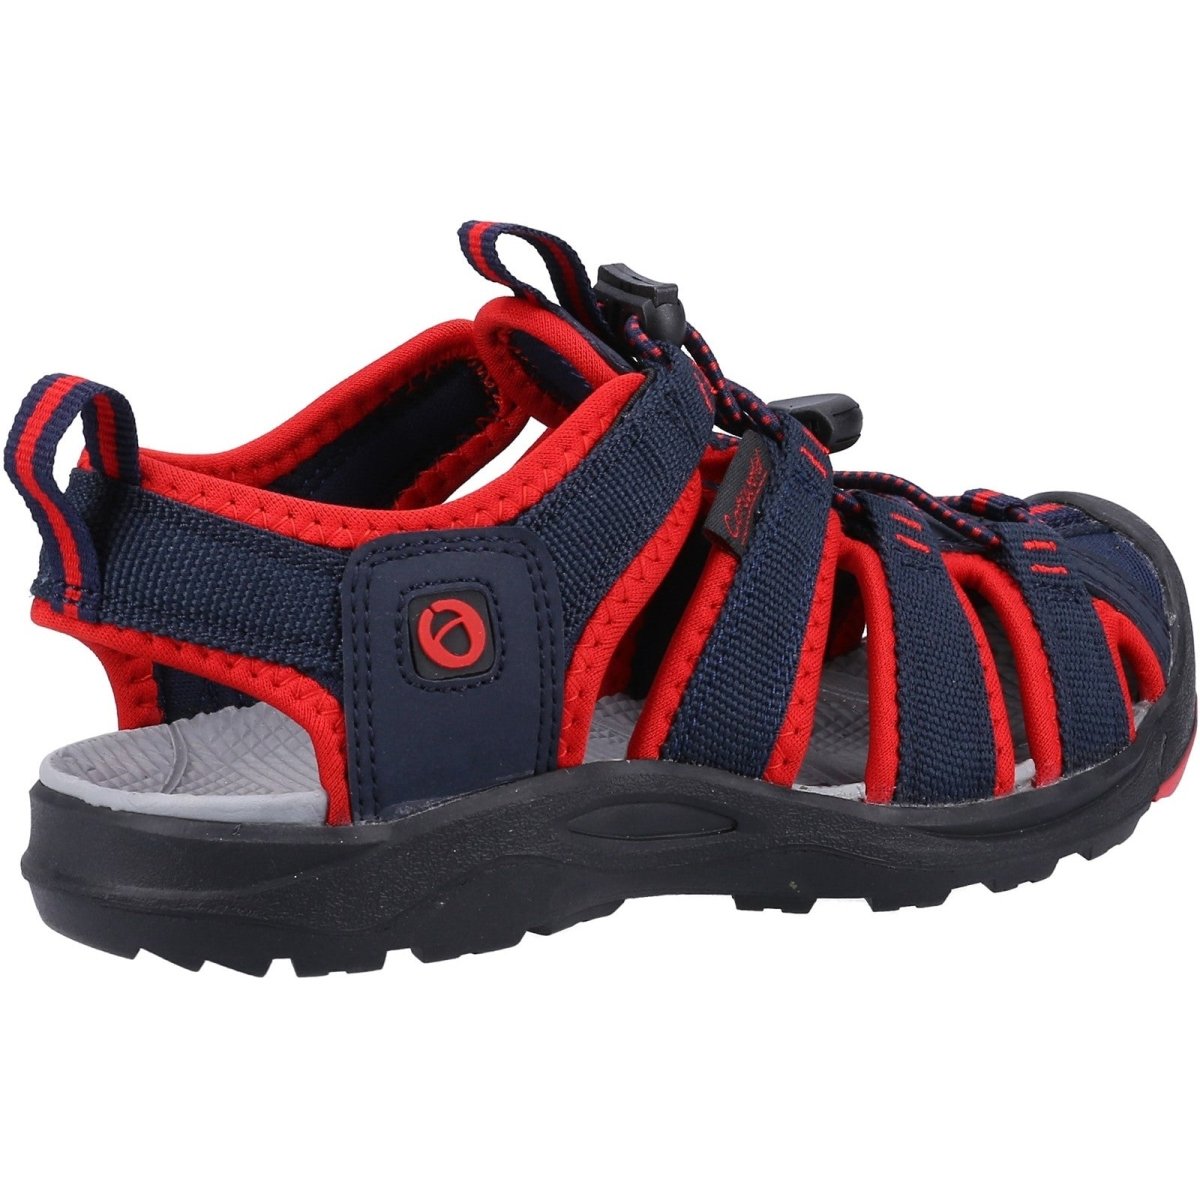 Cotswold Marshfield Kids Lightweight Summer Recycled Sandals - Shoe Store Direct